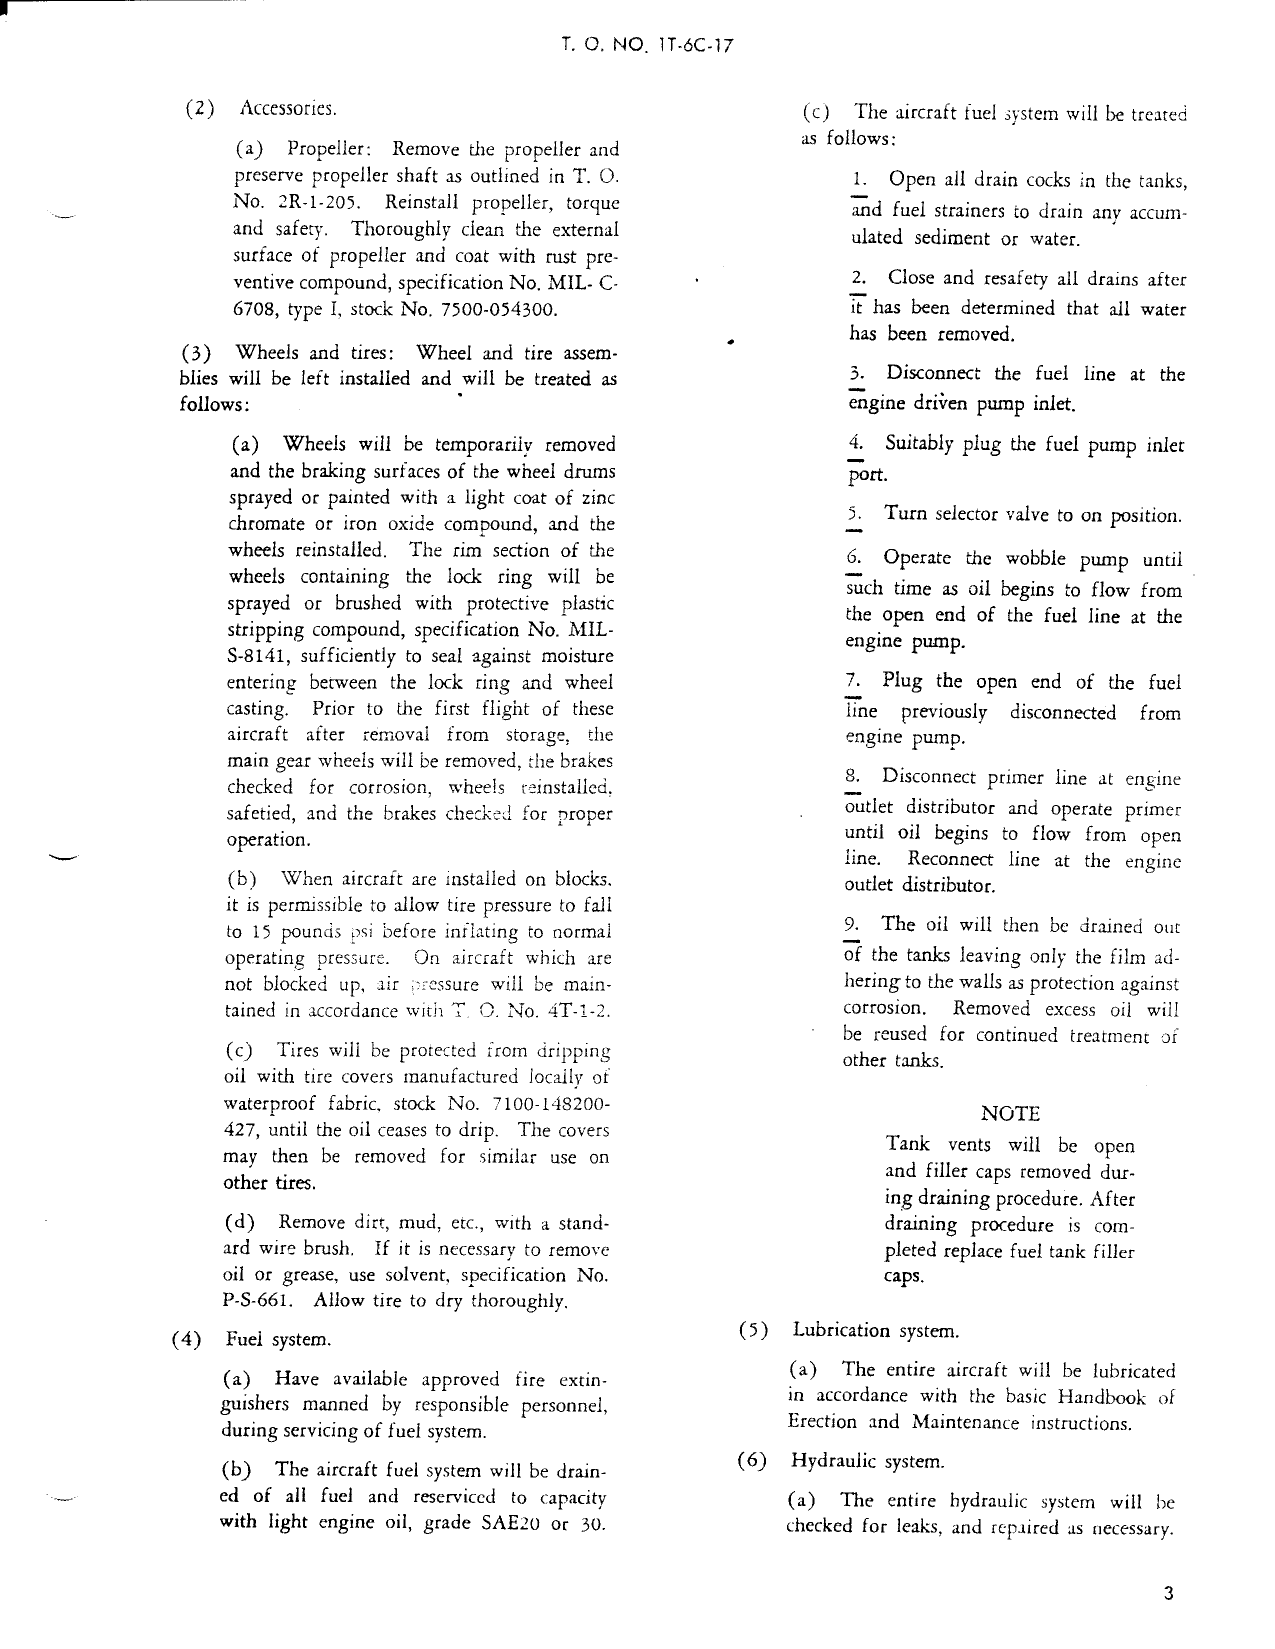 Sample page 3 from AirCorps Library document: Storage of Aircraft, T-6 Series